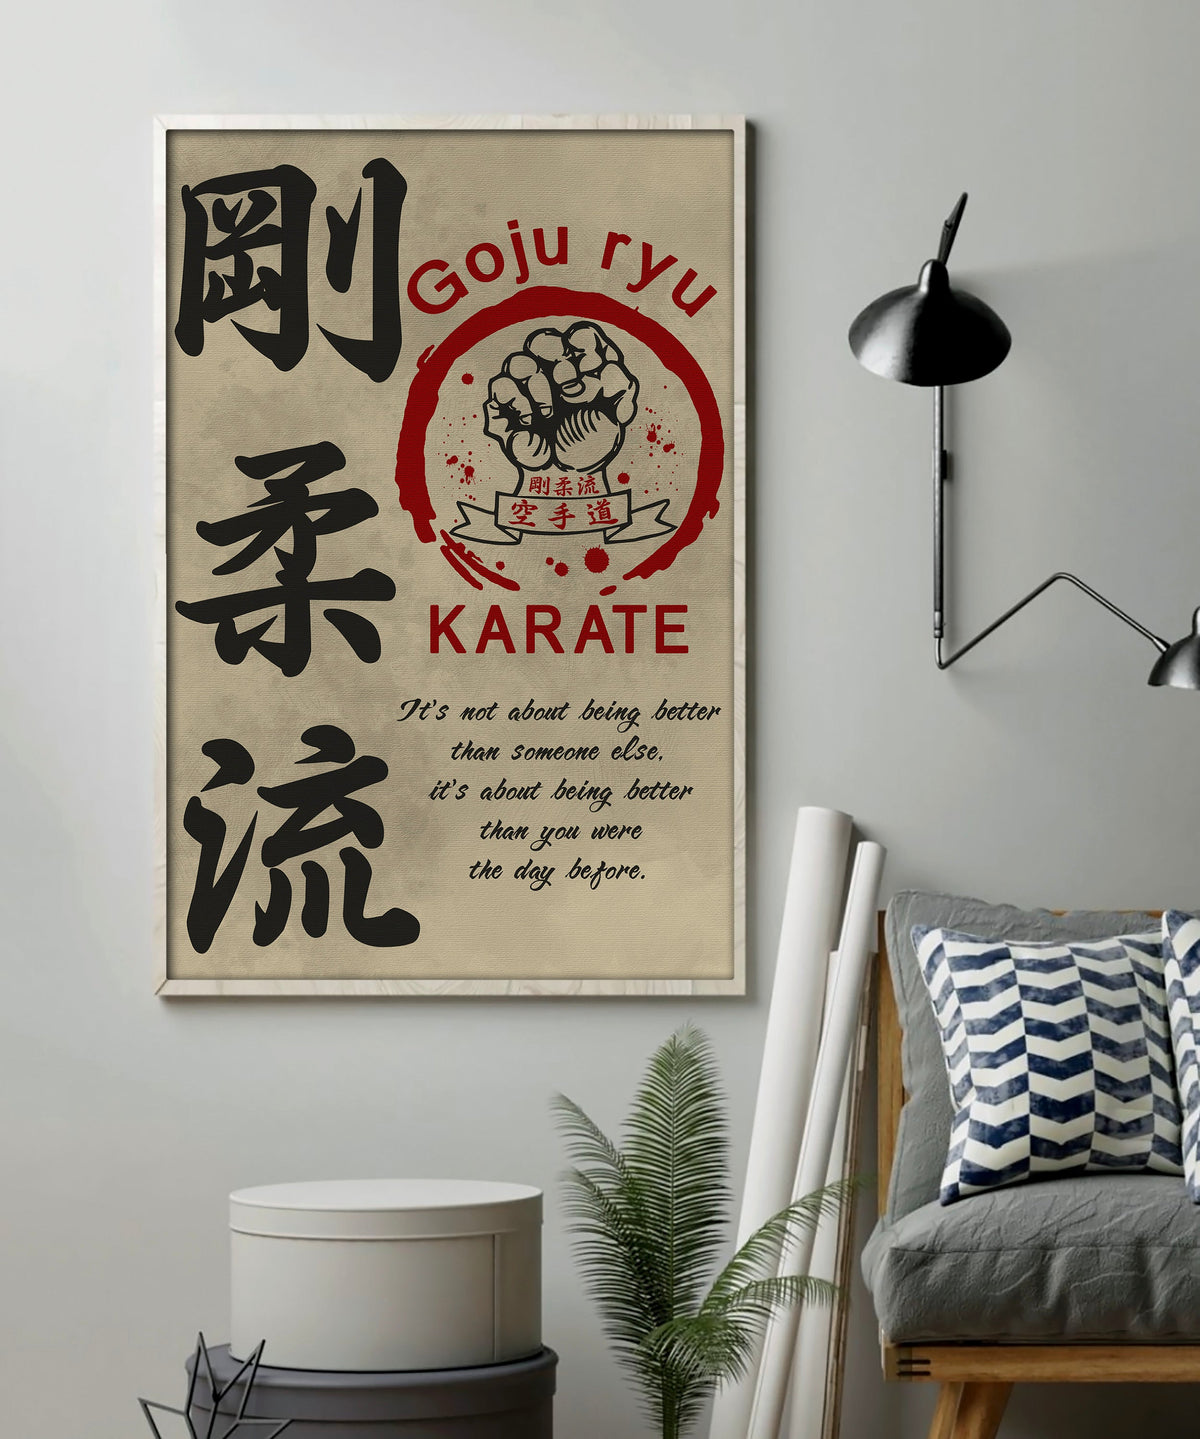 KA006 - It's About Being Better Than You Were The Day Before - Goju ryu Karate  - Vertical Poster - Vertical Canvas - Karate Poster